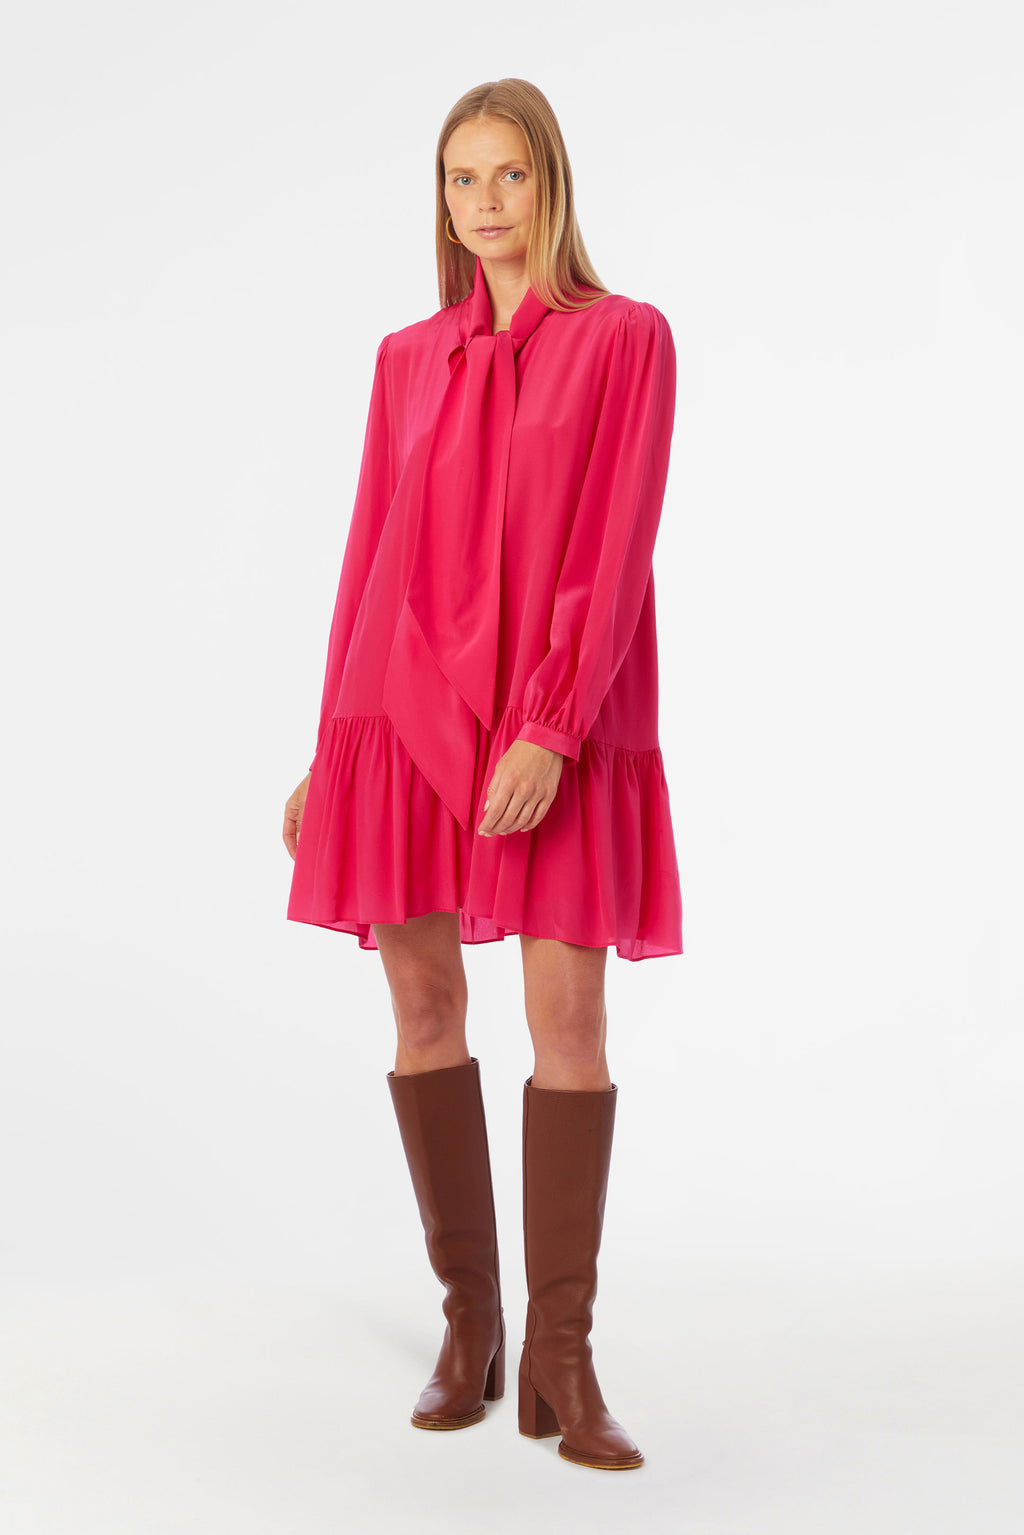 Pink mini dress with large bow around the neck, long sleeves, and button cuffs